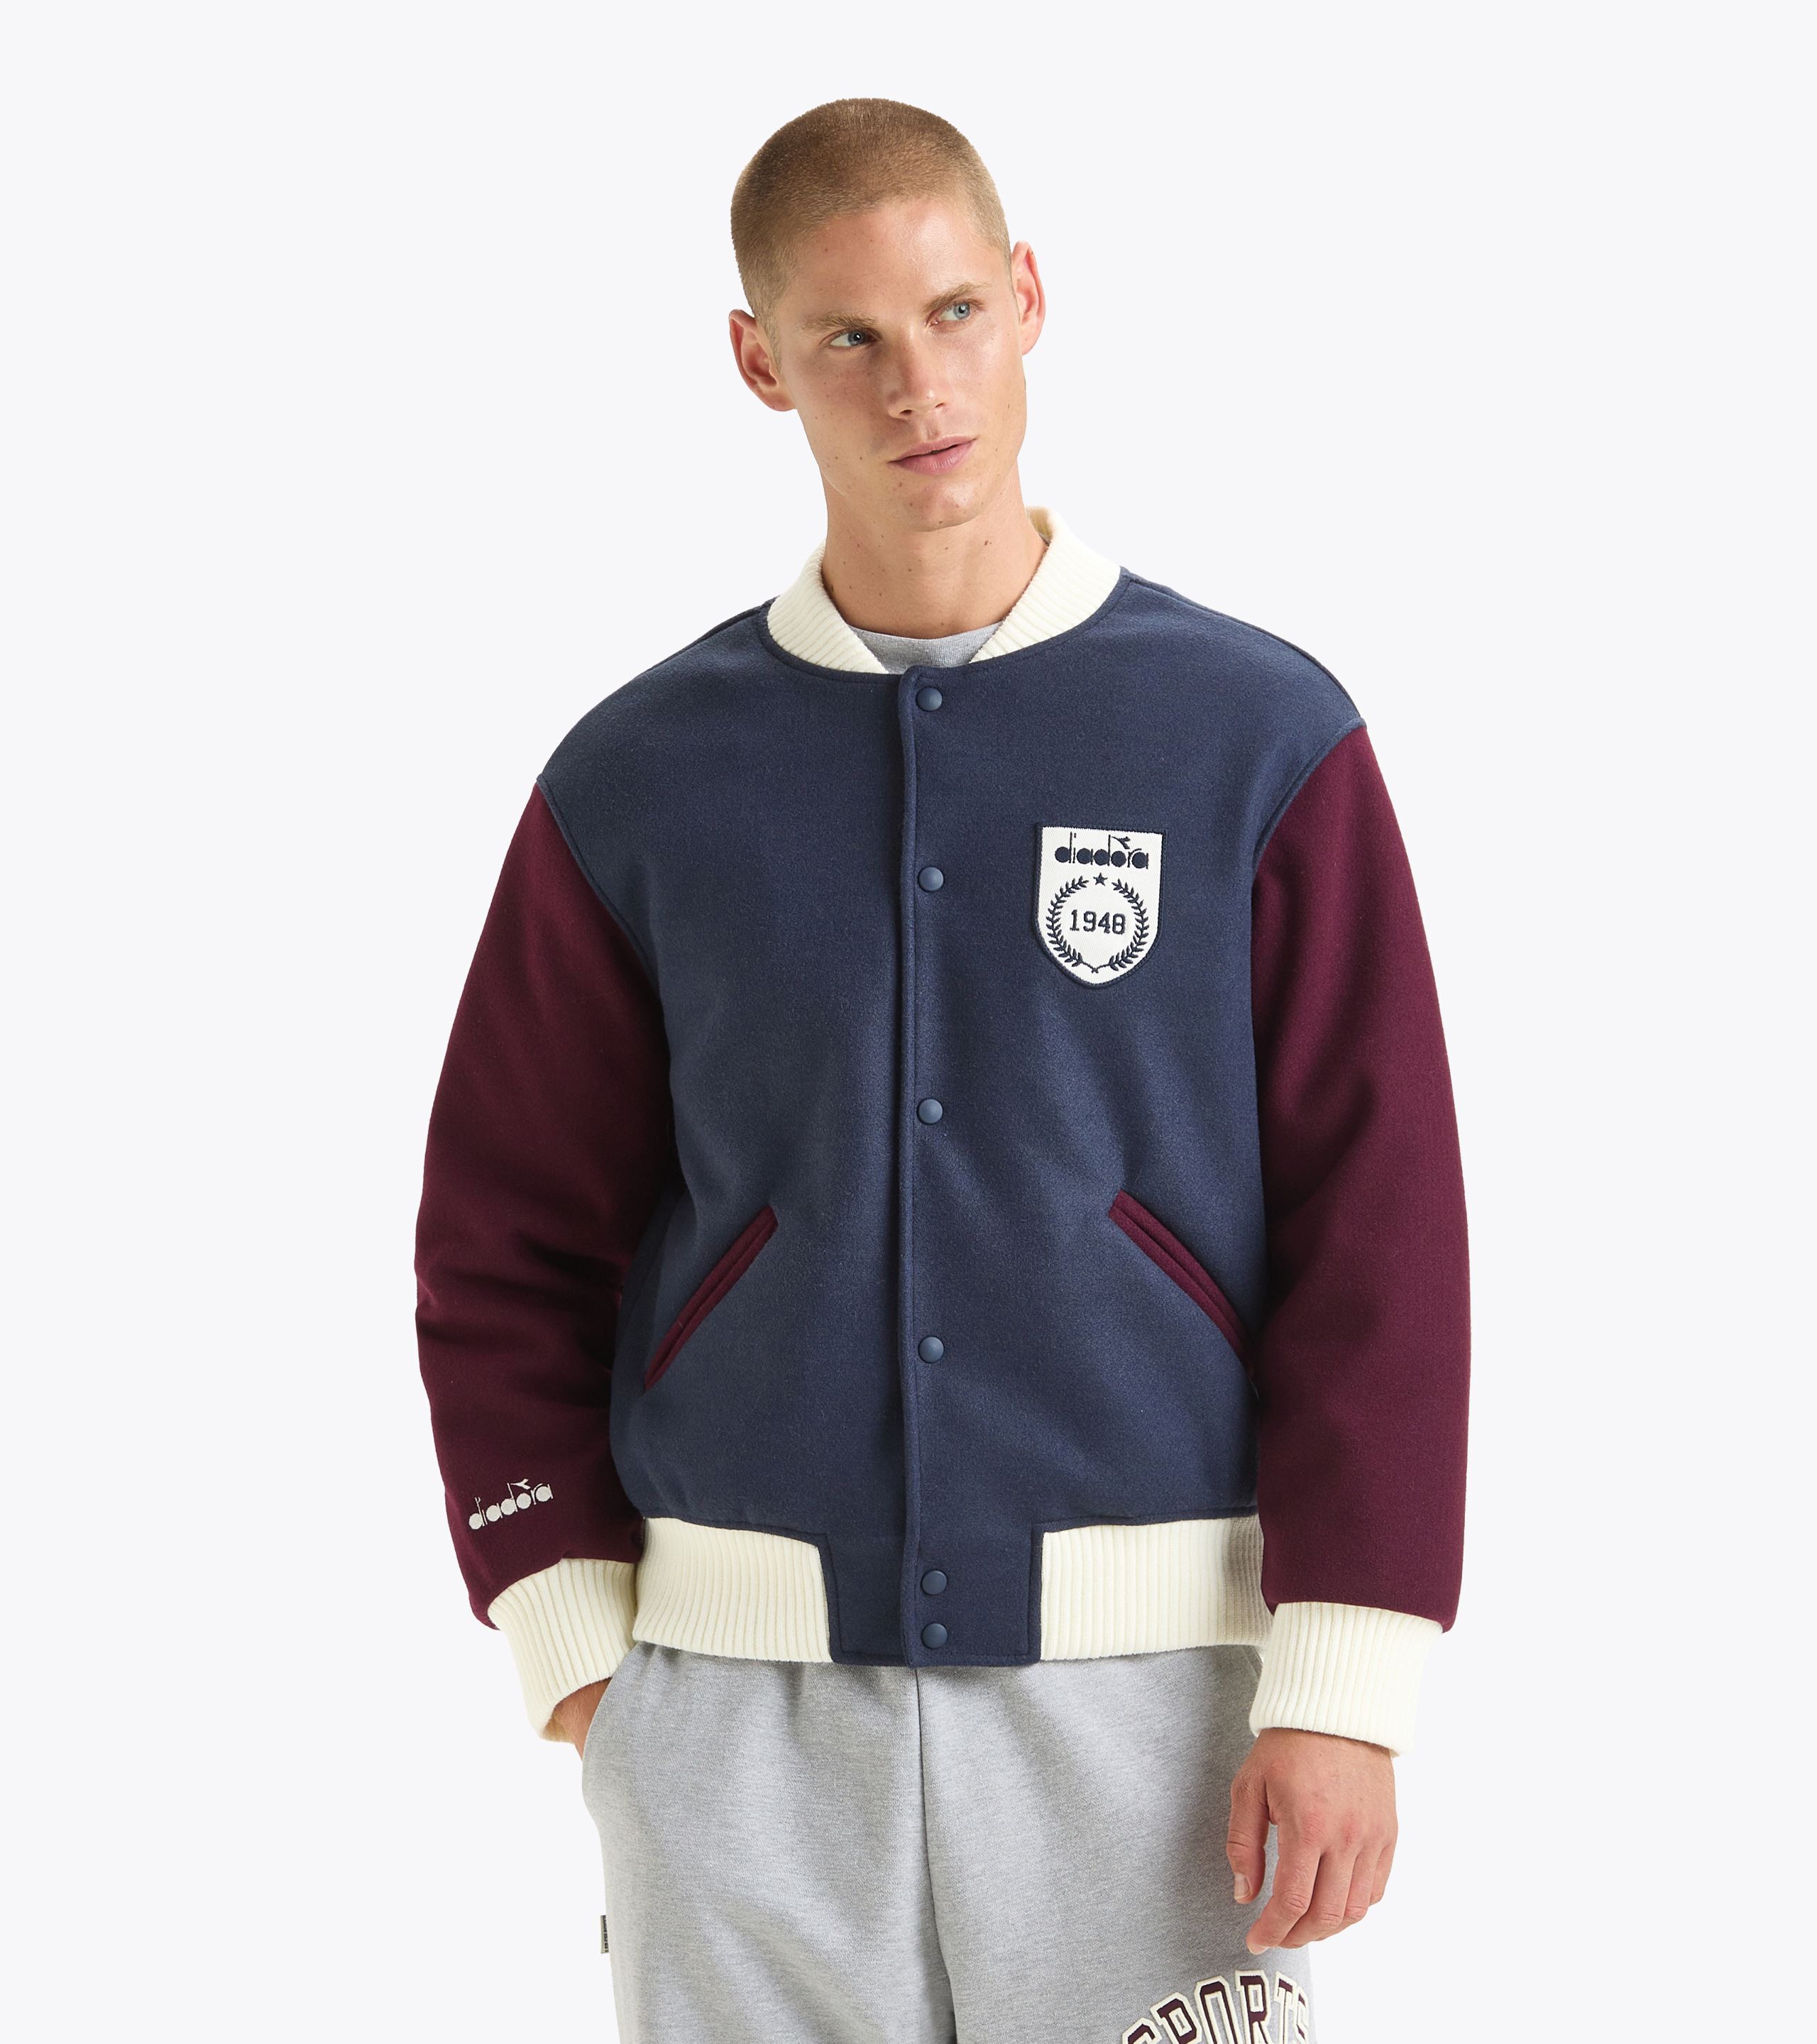 JACKET VARSITY LEGACY Insulated jacket - Made in italy - Gender